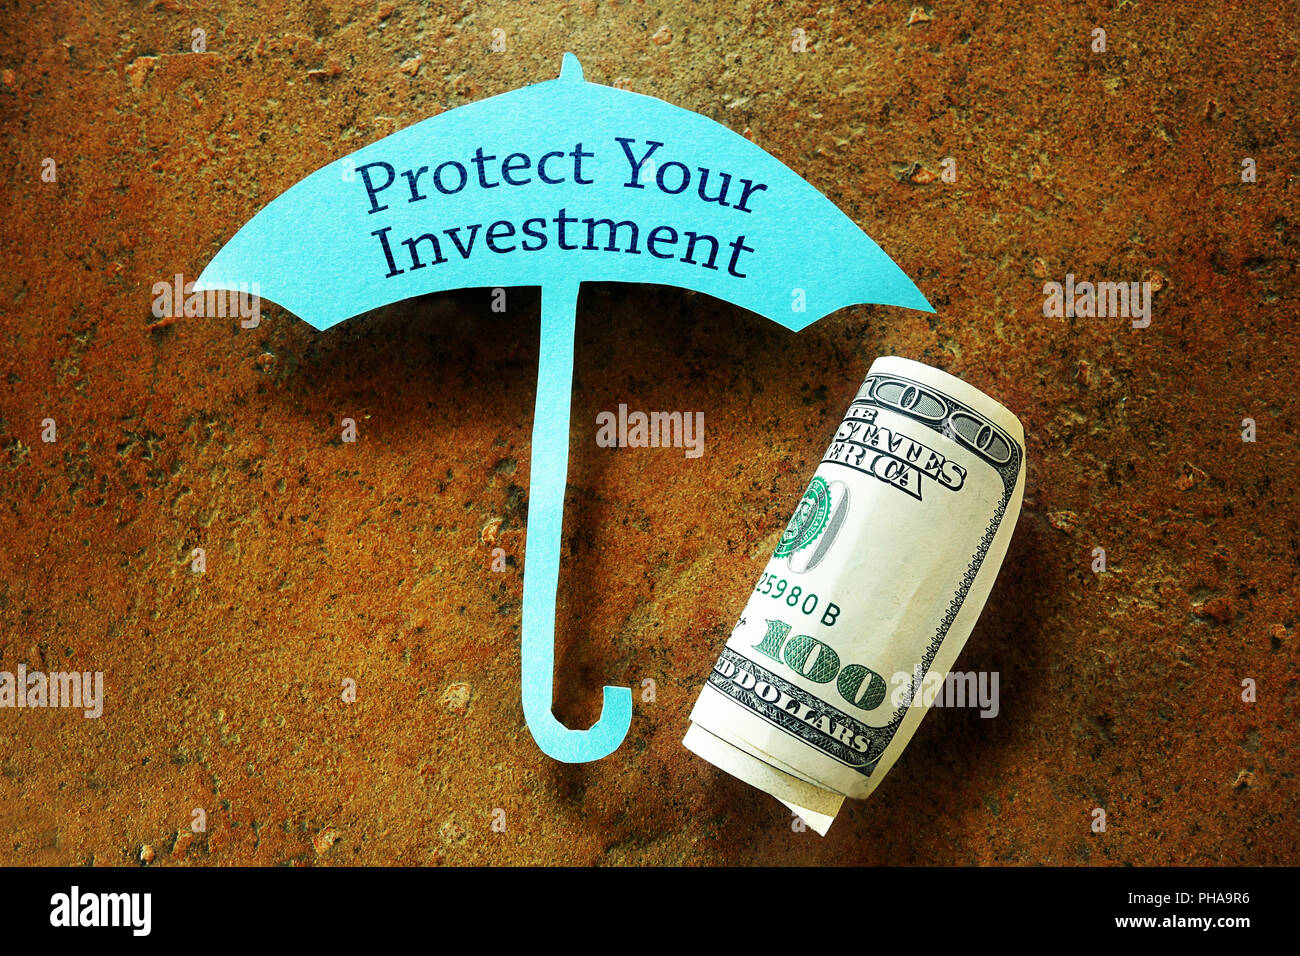 Investment protection Stock Photo